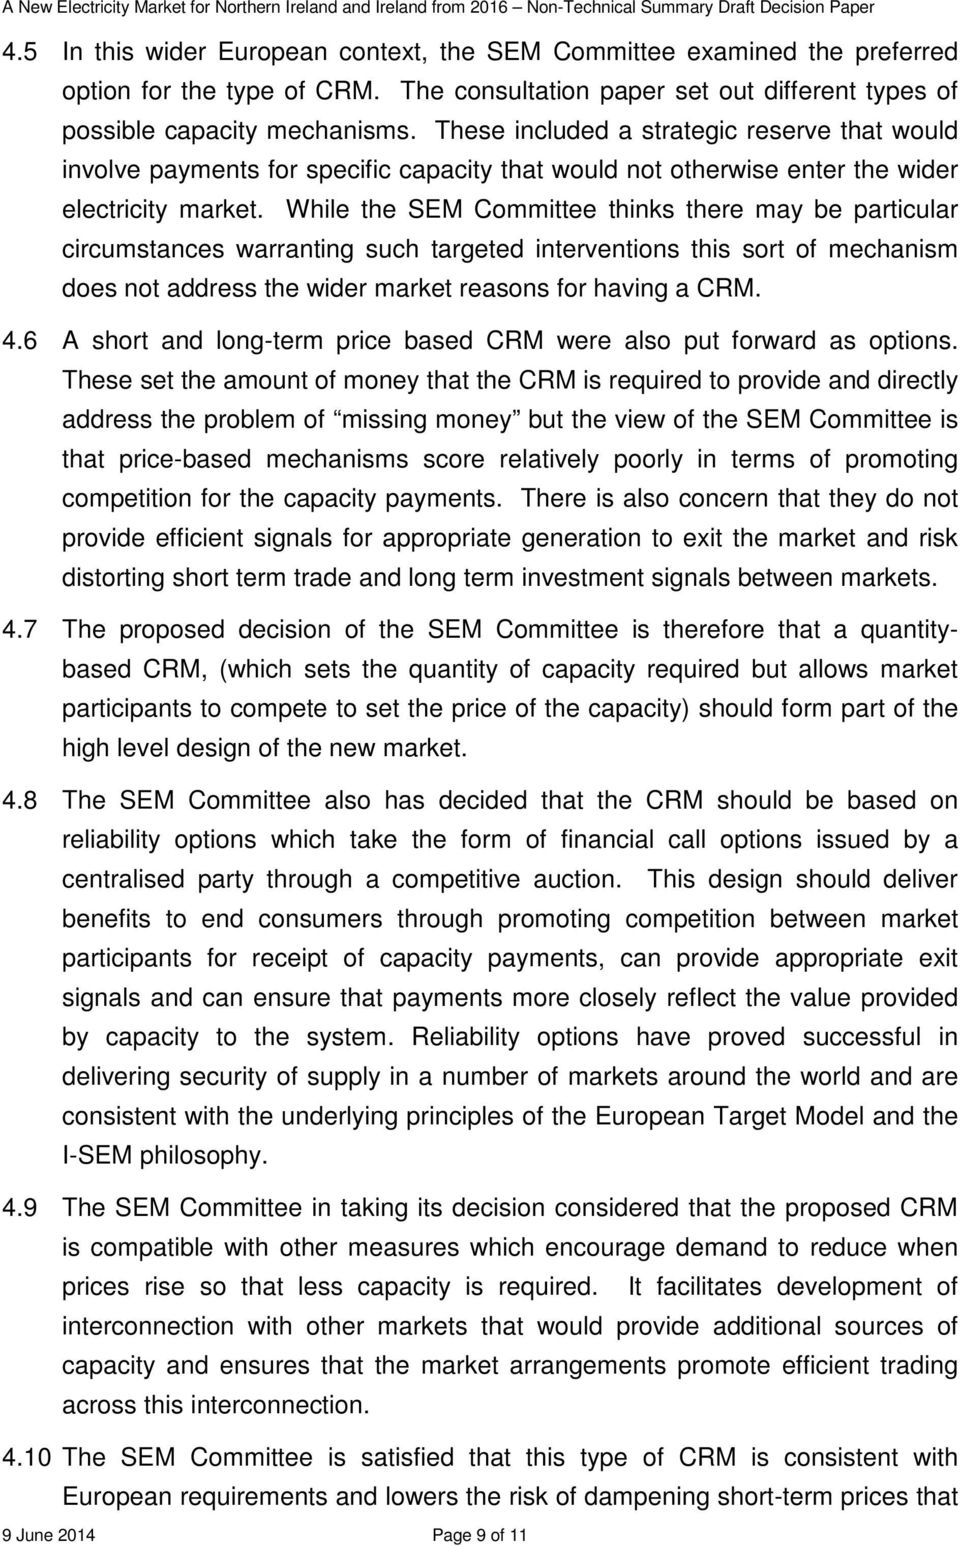 While the SEM Committee thinks there may be particular circumstances warranting such targeted interventions this sort of mechanism does not address the wider market reasons for having a CRM. 4.